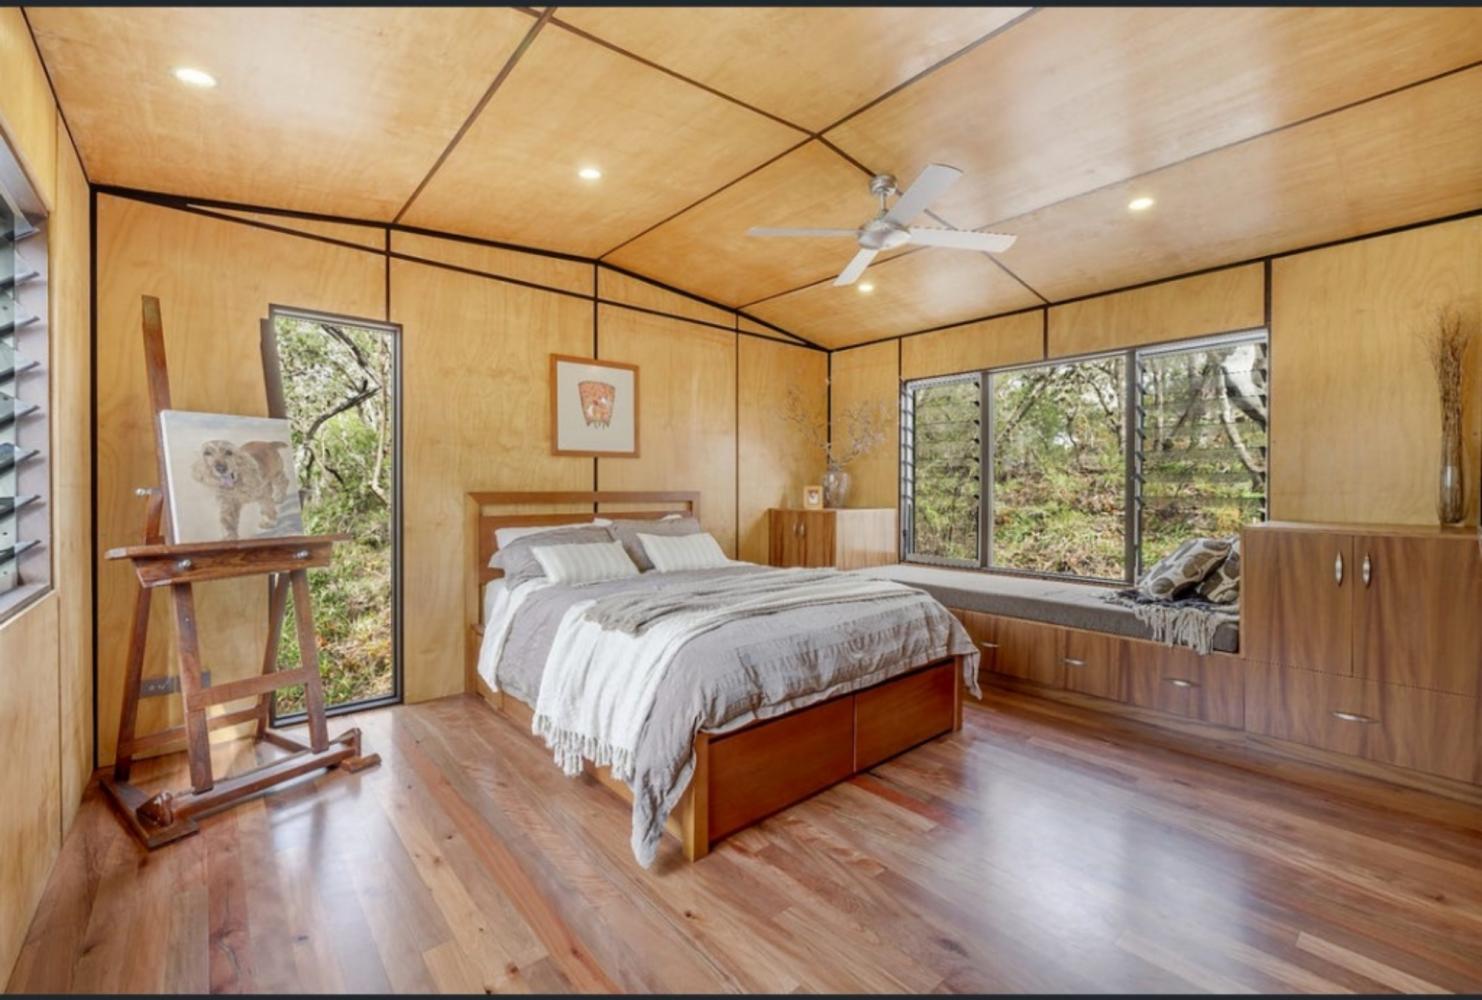 master bedroom with queen bed and ensuite. Views of surrounding forest